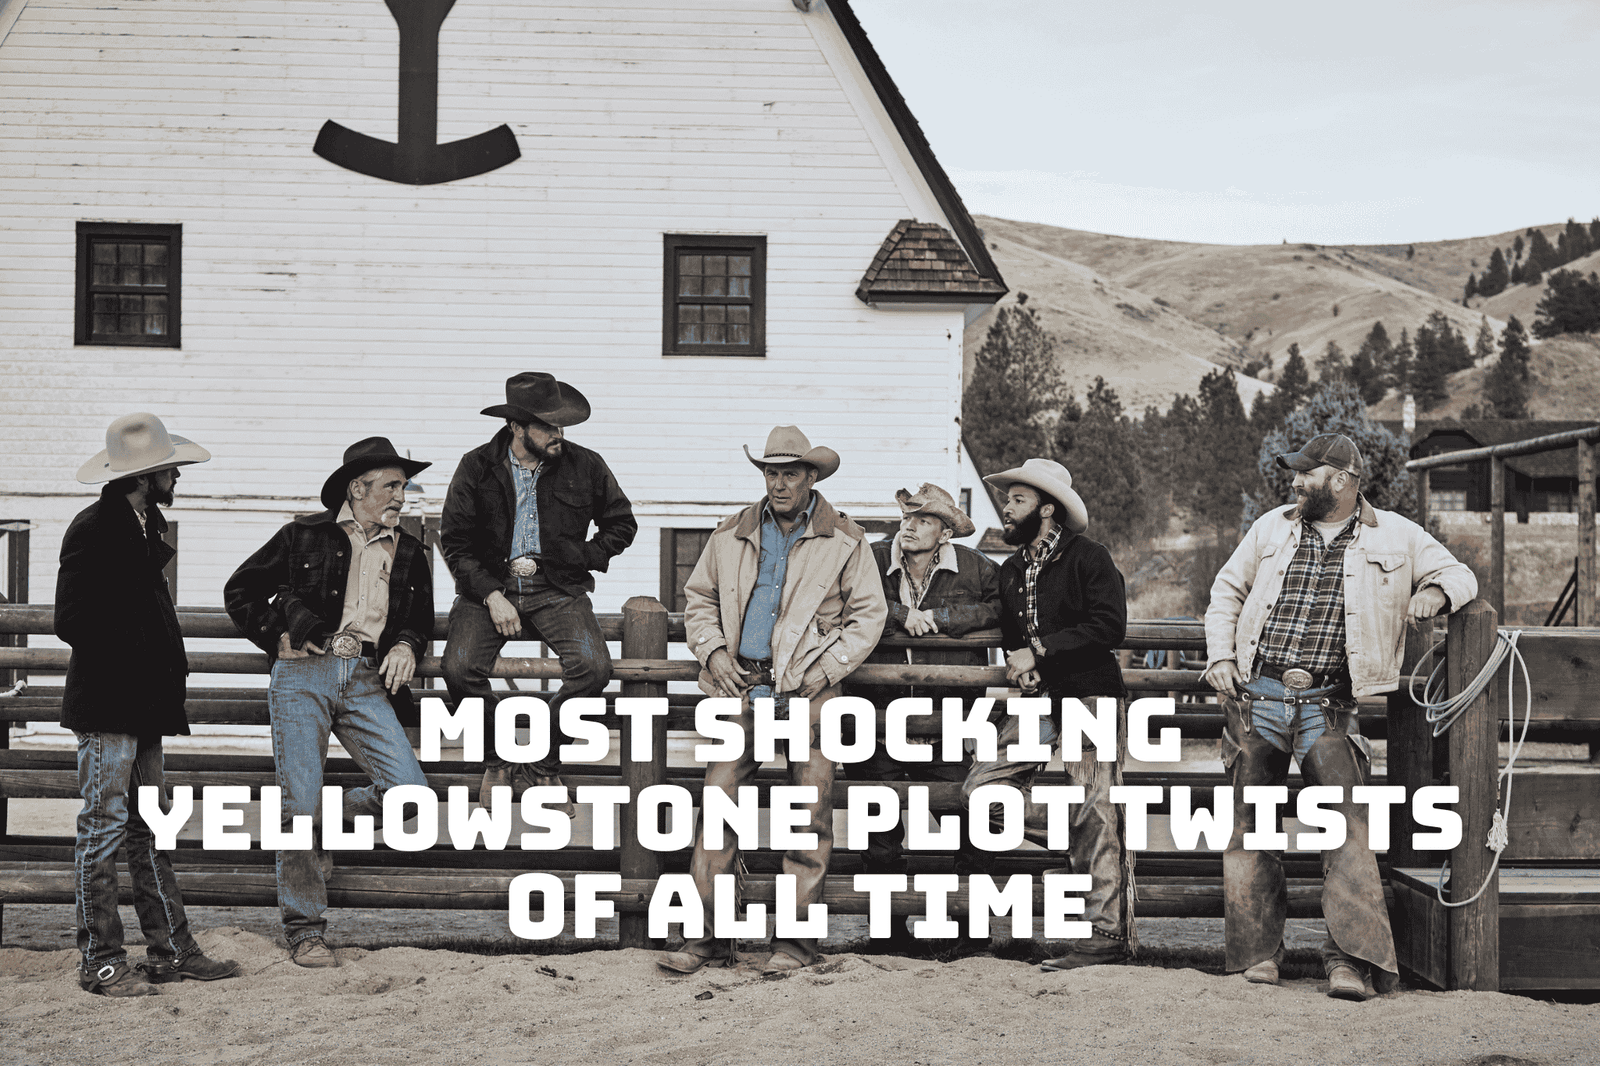 Most Shocking Yellowstone Plot Twists of All Time!